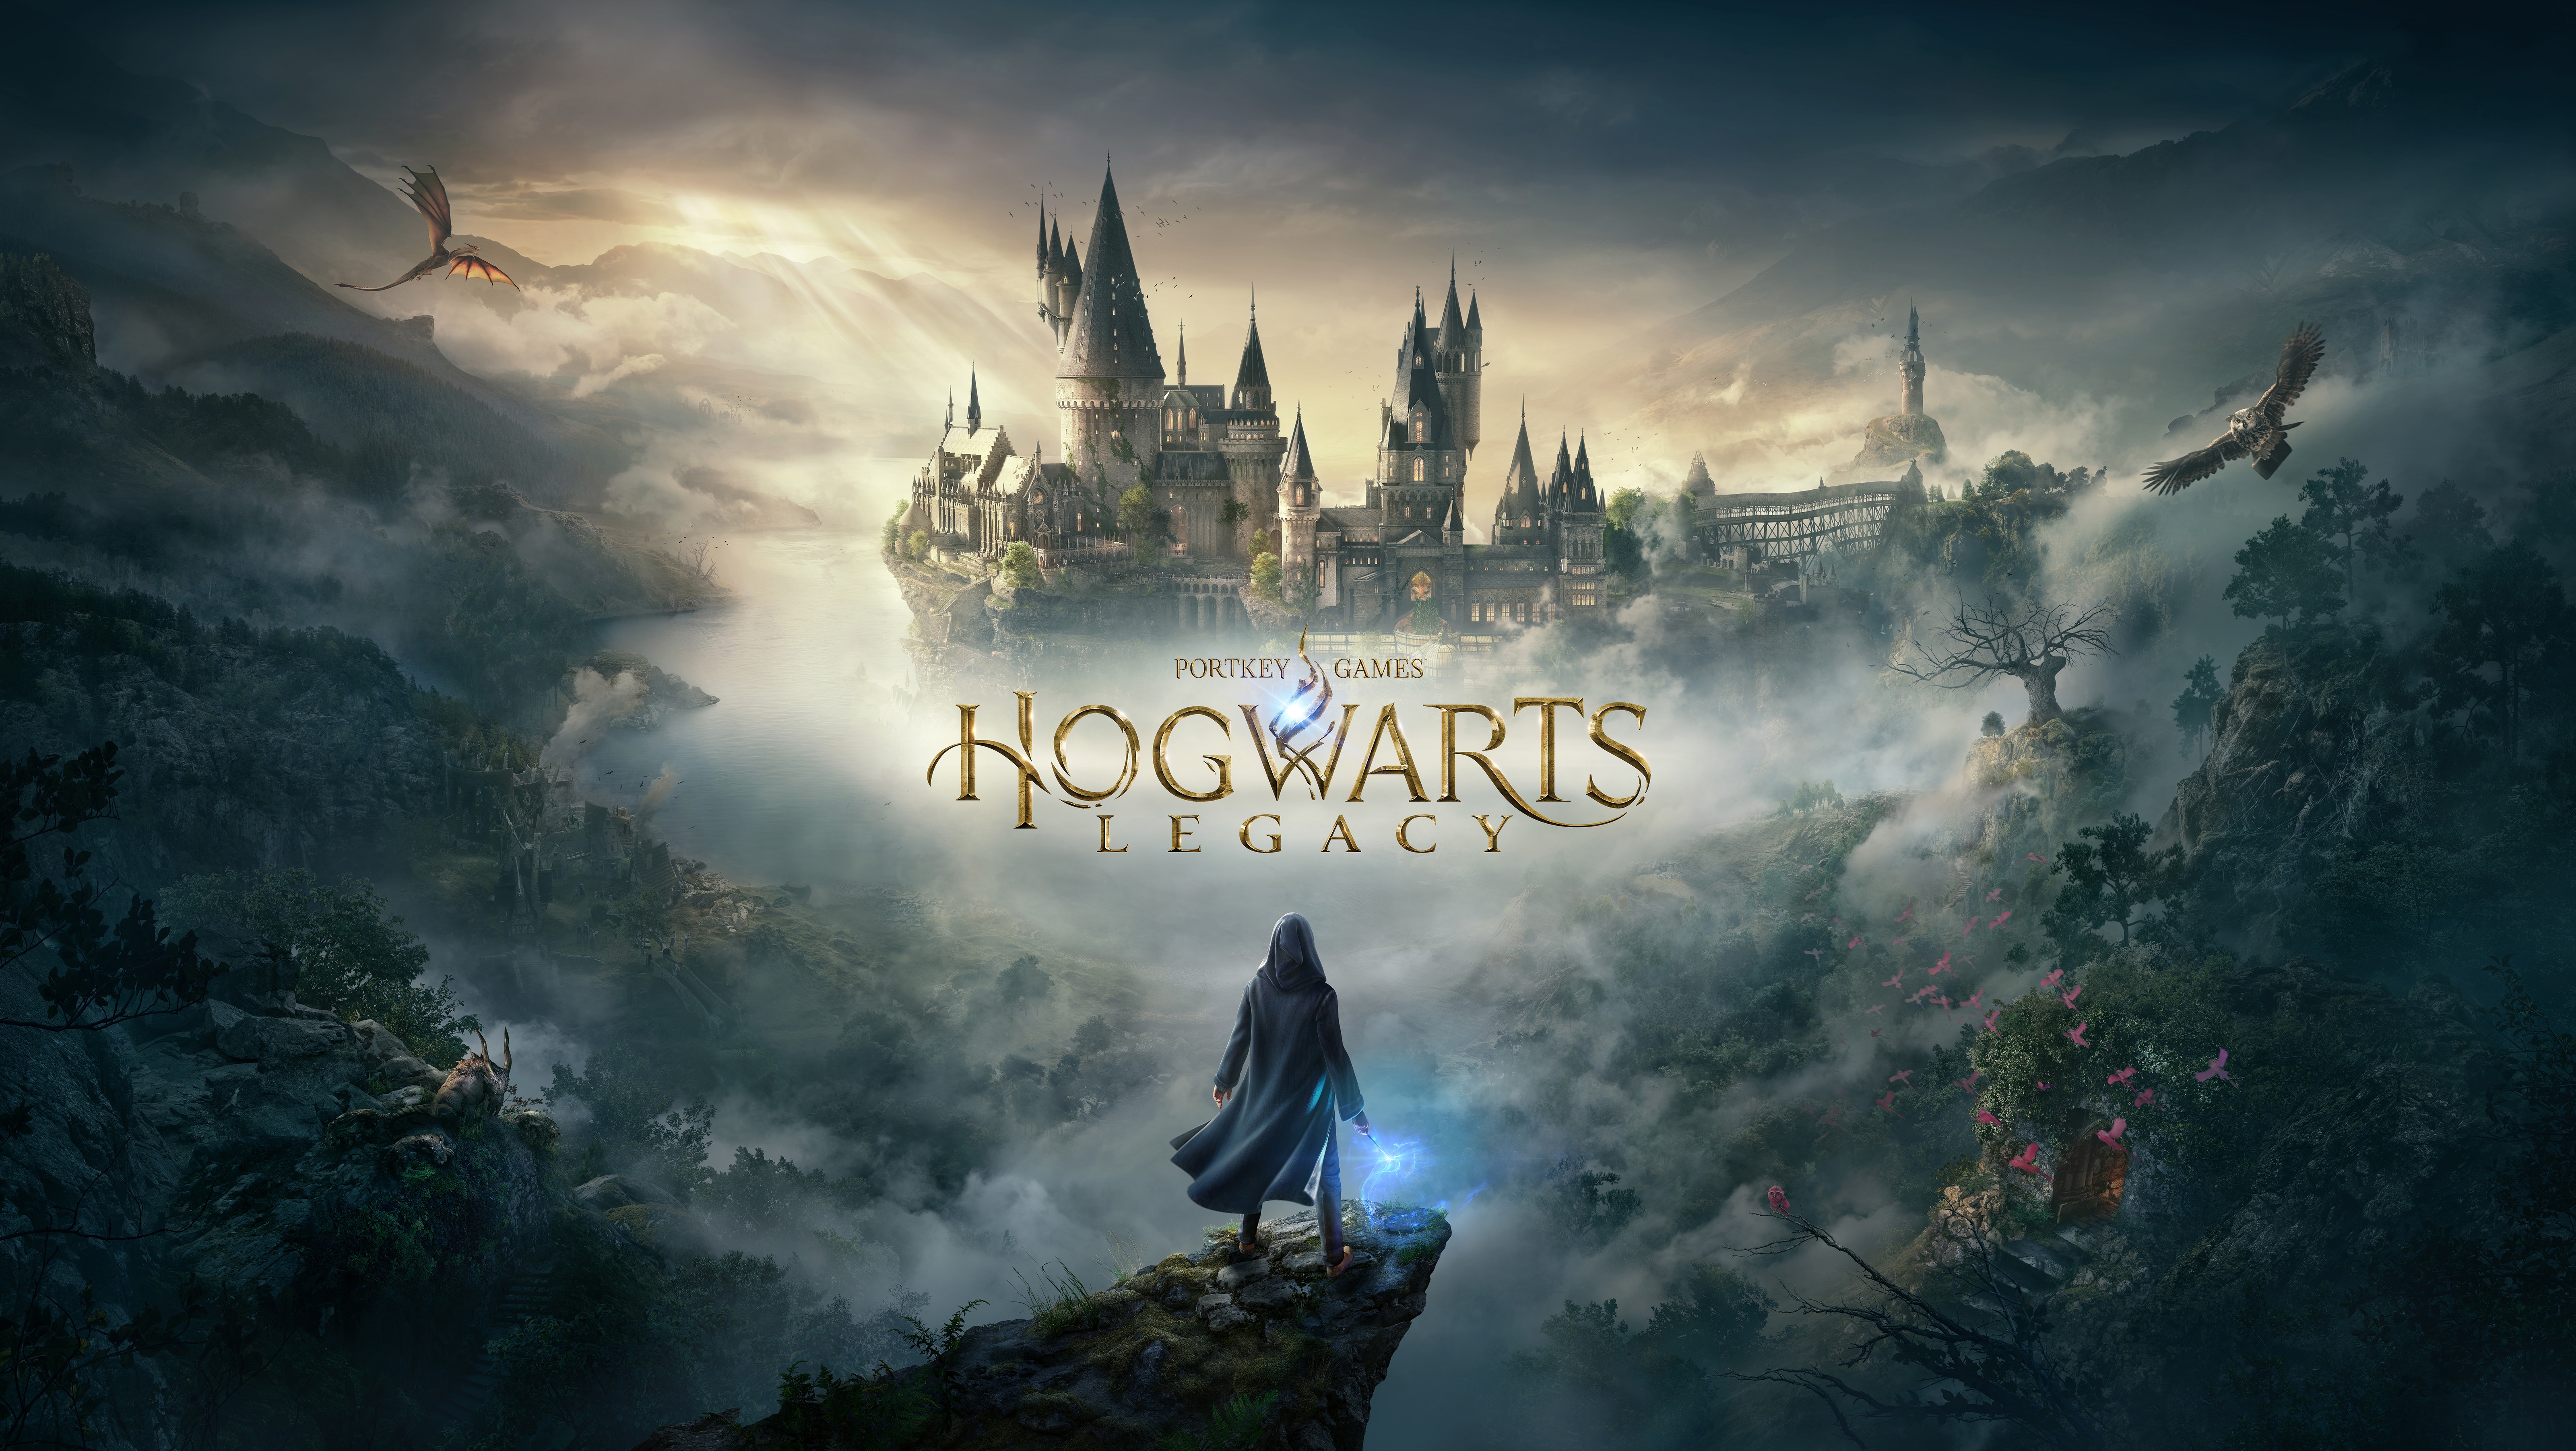 HD wallpaper, Playstation 4, Xbox One, Xbox Series X And Series S, 2021 Games, Playstation 5, Hogwarts Legacy, 5K, Pc Games